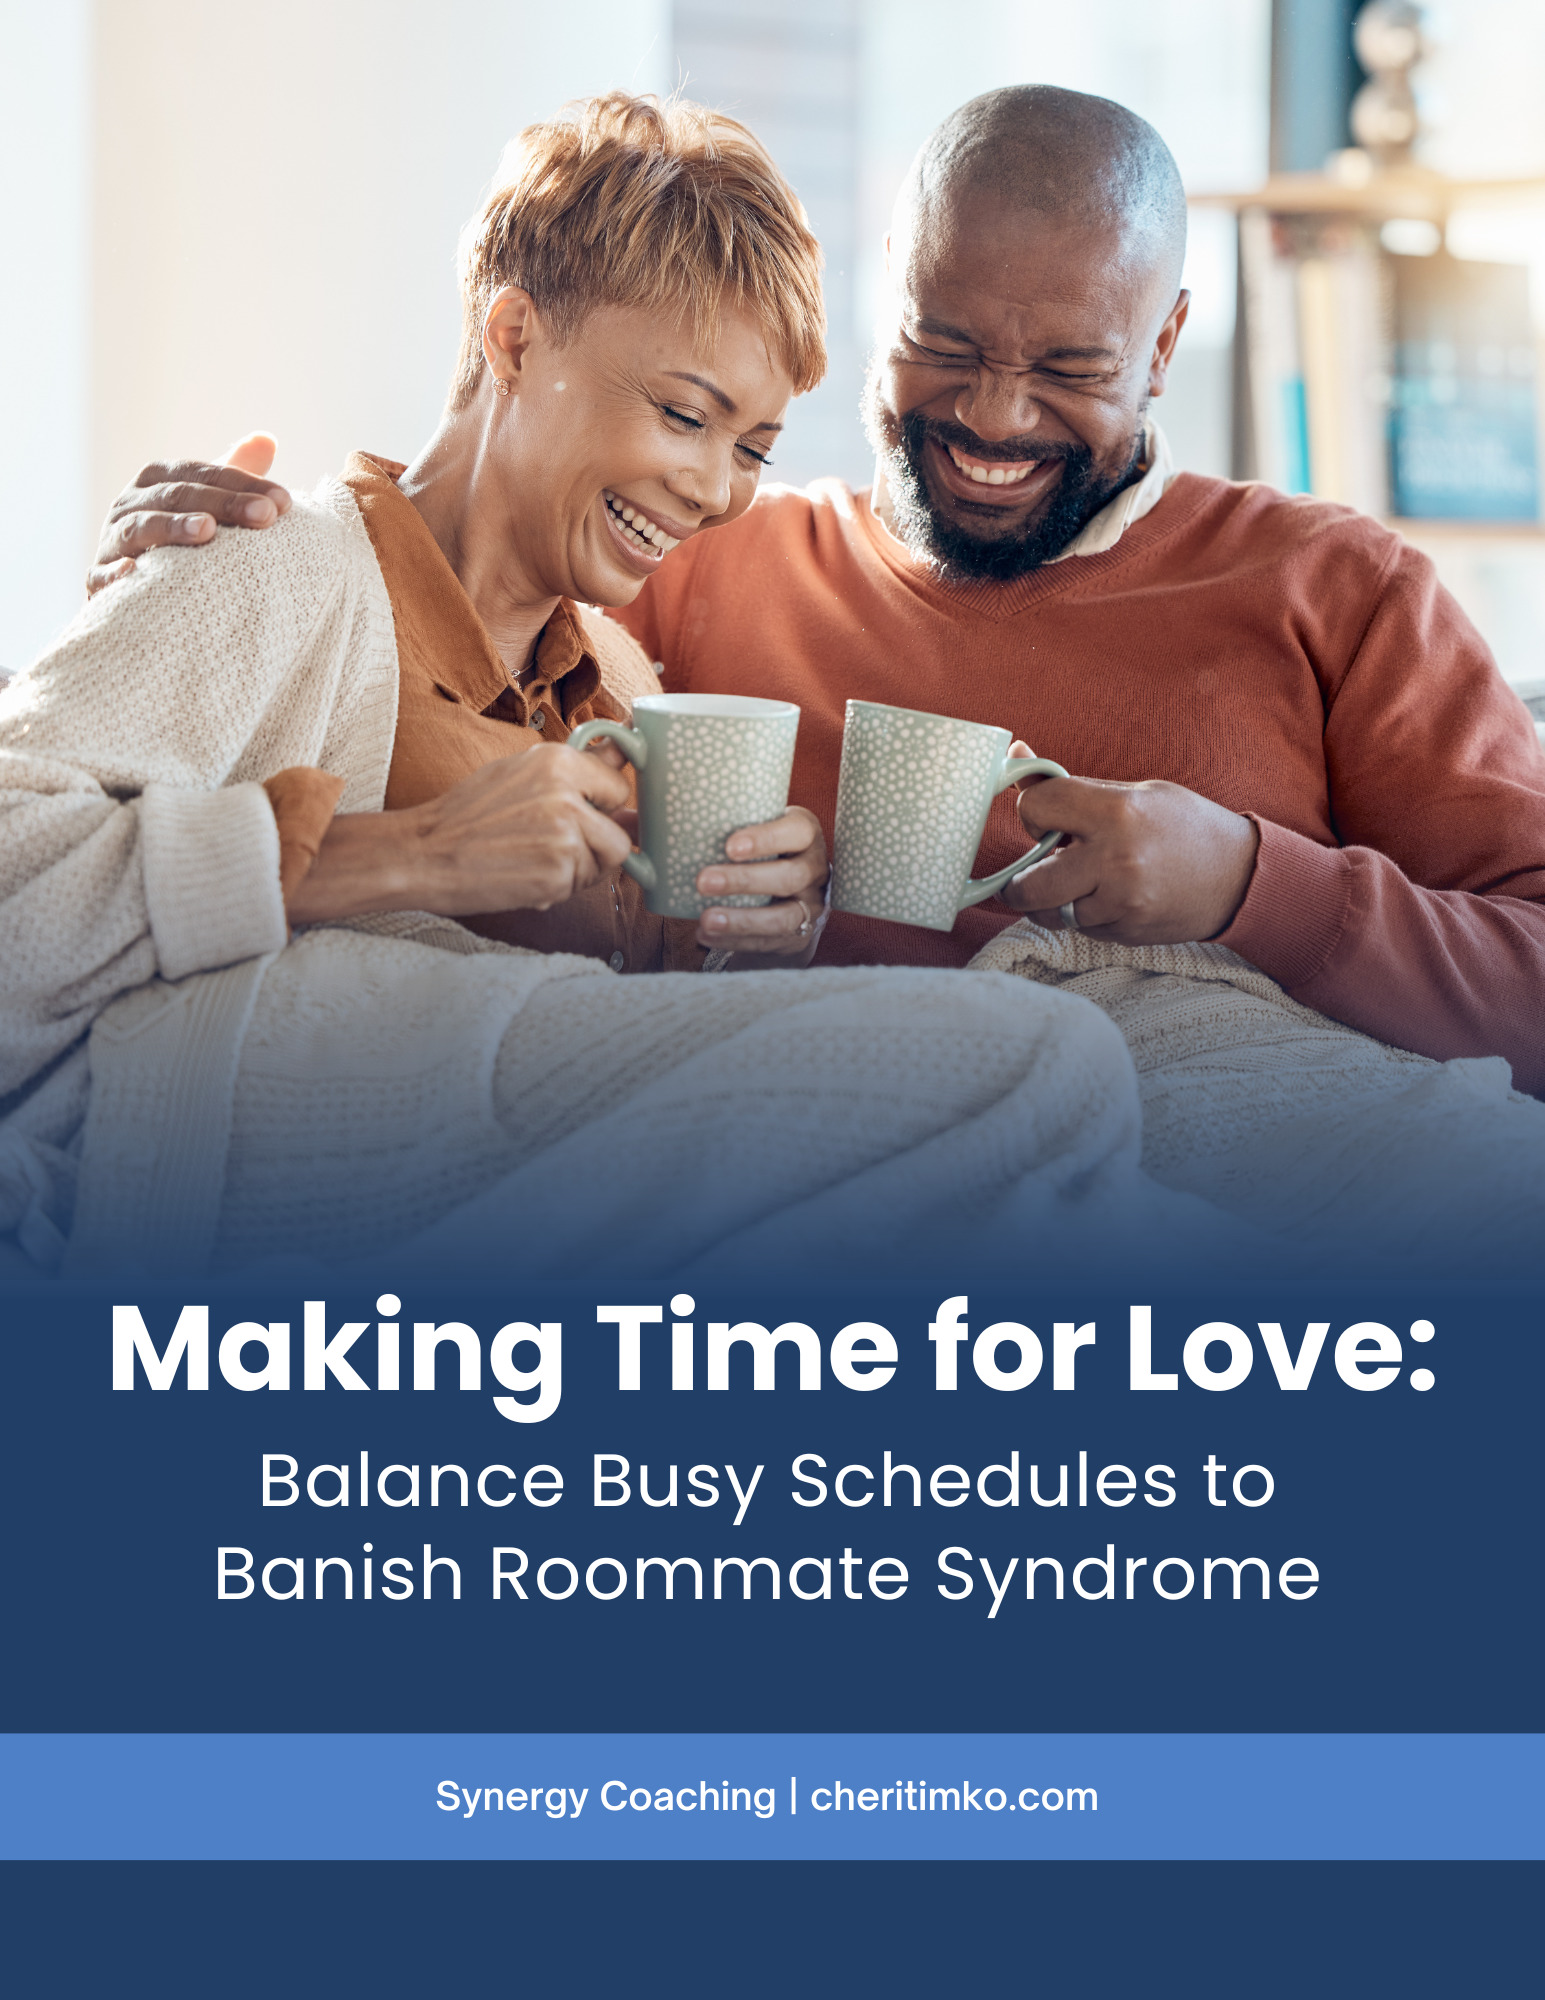 Enrich your relationship with Cheri Timko's guide - "Make Time For Love: Balancing Busy Schedules."